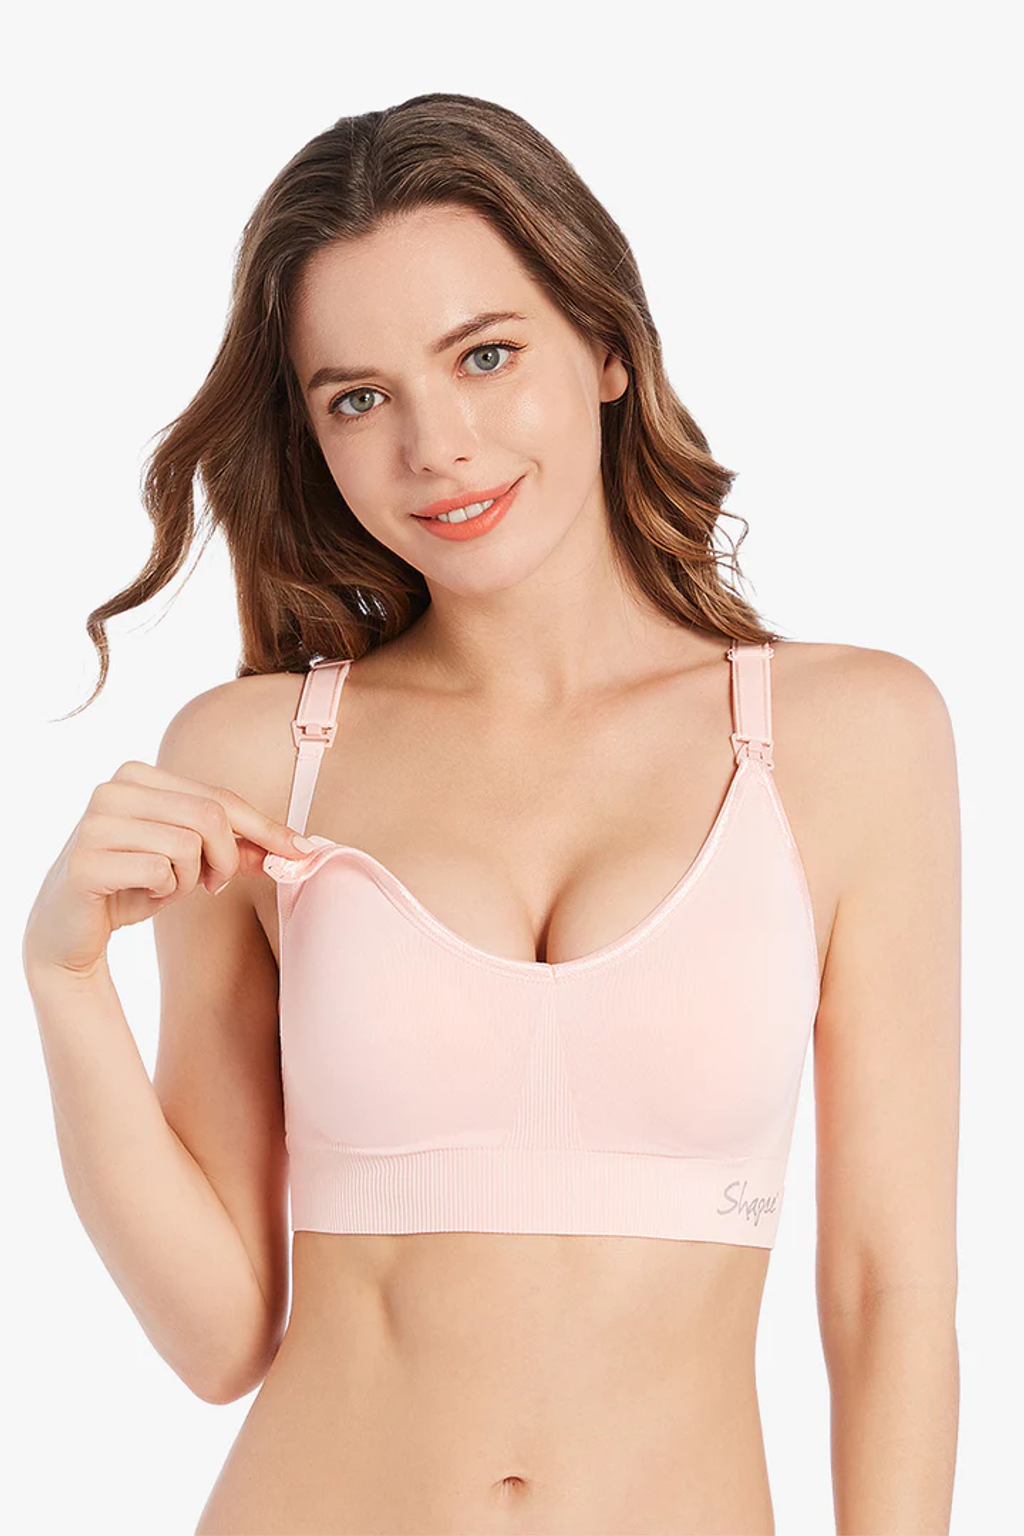 LUXE_shopify_pink2_720x